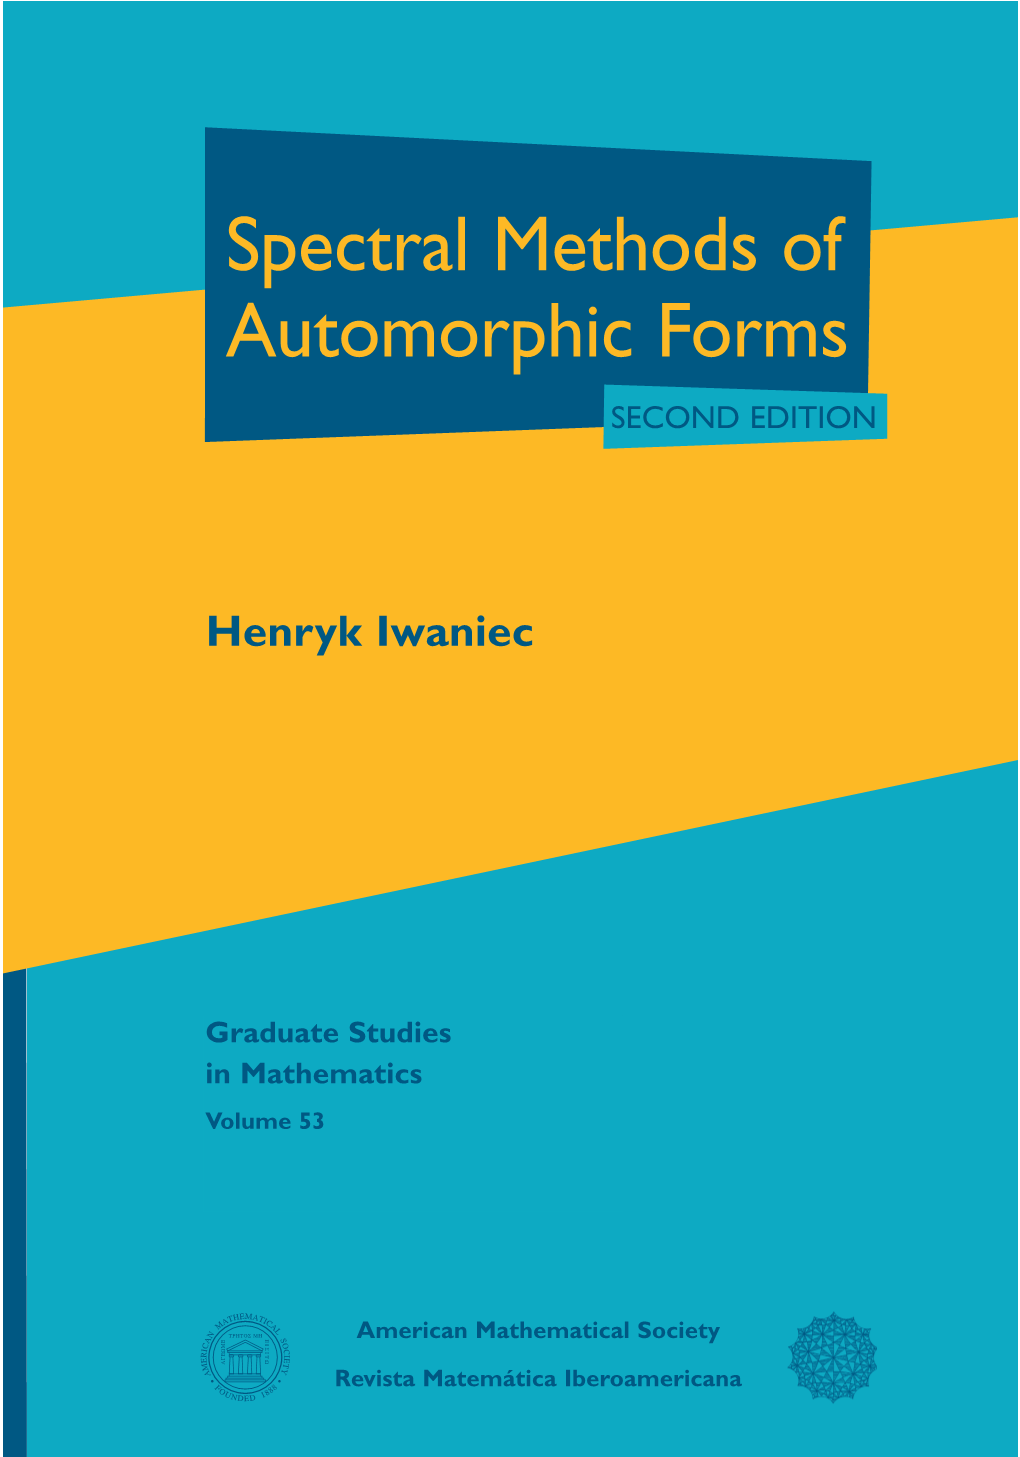 Spectral Methods of Automorphic Forms SECOND EDITION